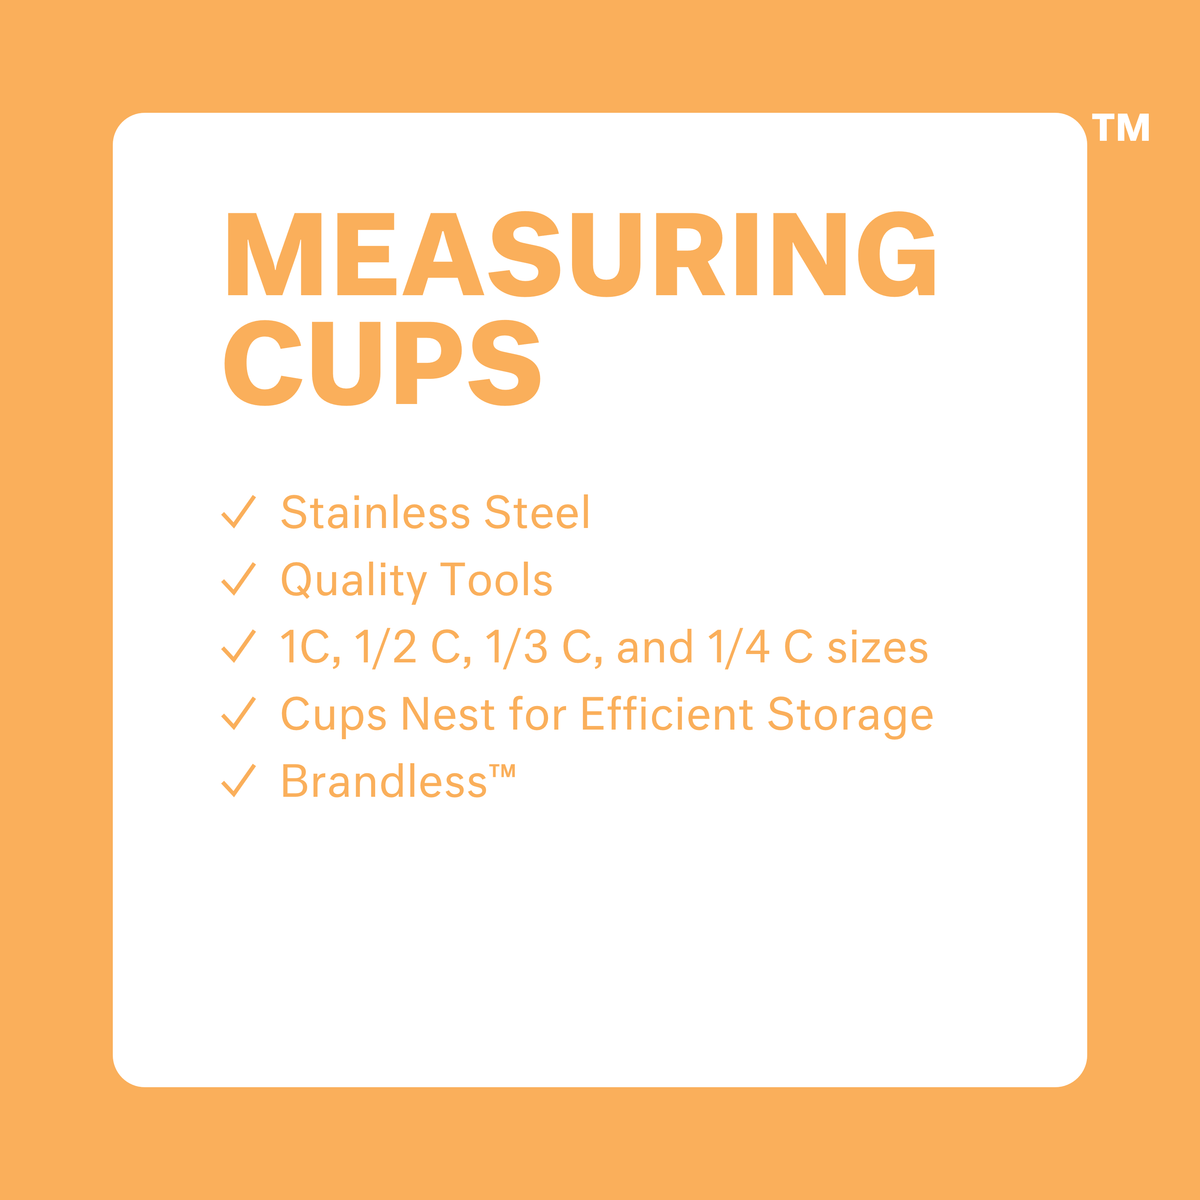 Measuring Cups: stainless steel, quality tools, 1C, 1/2C, 1/3C, and 1/4C sizes. Cups nest for efficient storage. brandless.